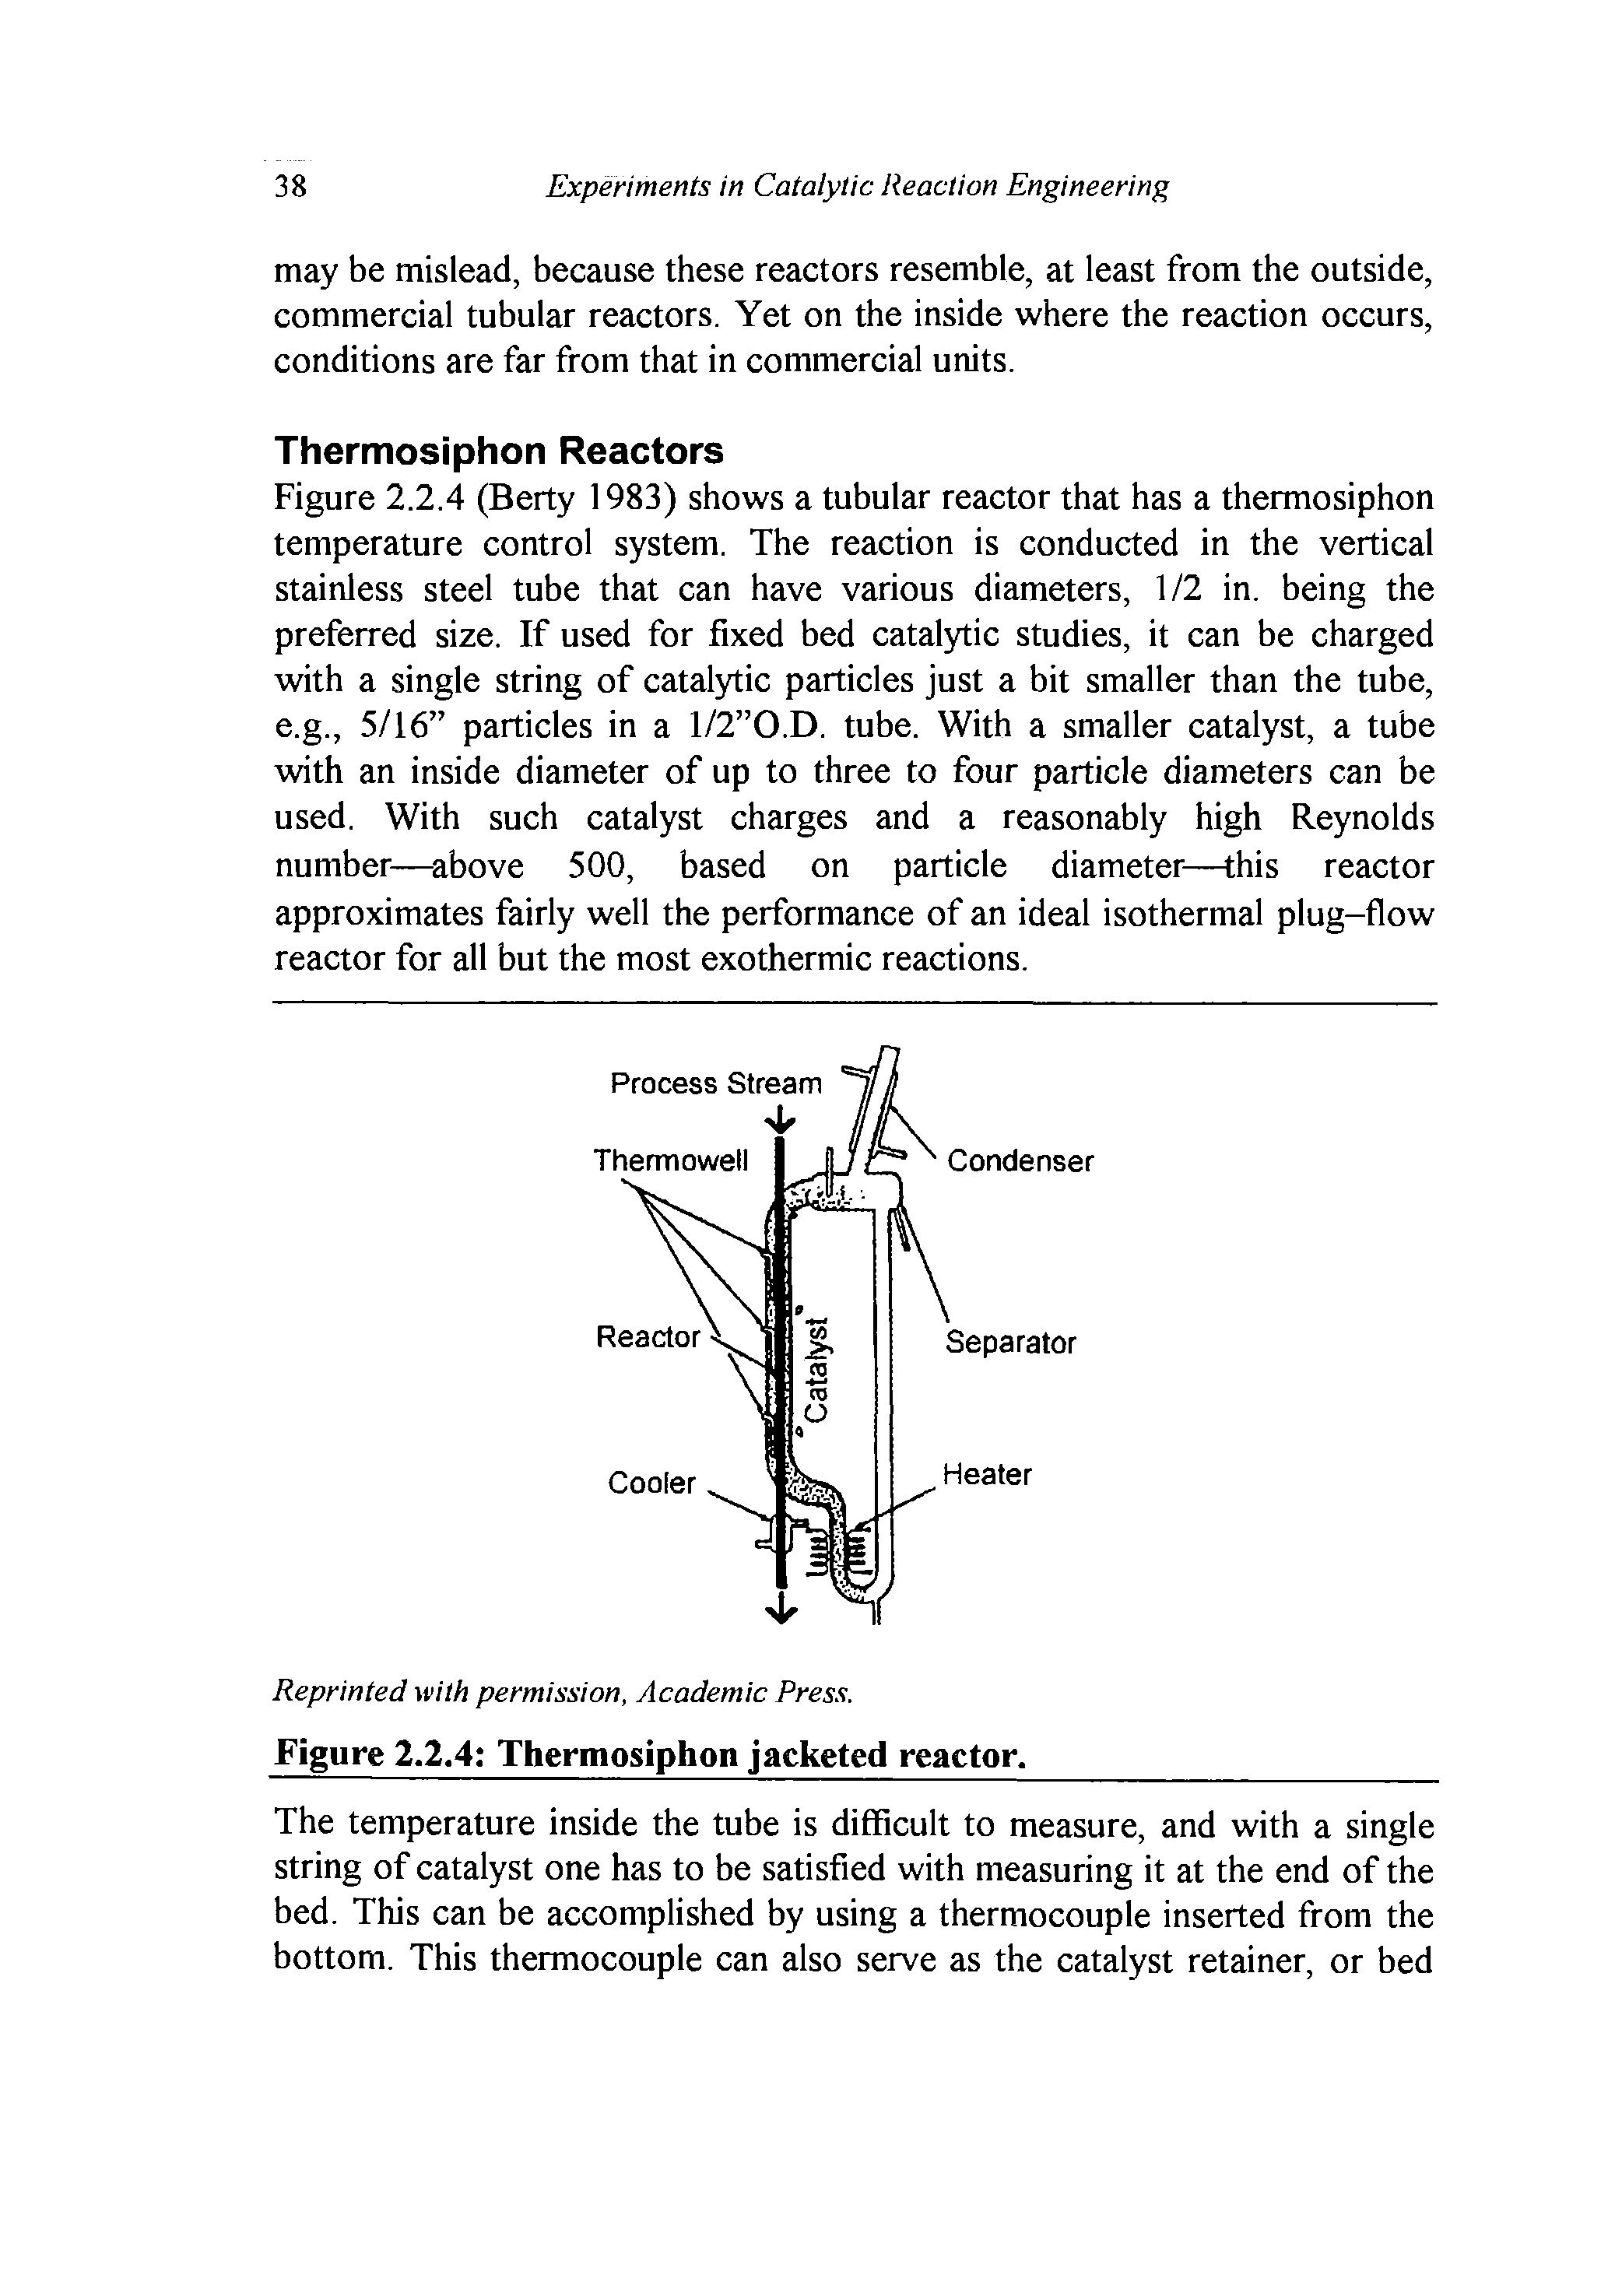 Figure 2.2.4 (Berty 1983) shows a tubular reactor that has a thermosiphon temperature control system. The reaction is conducted in the vertical stainless steel tube that can have various diameters, 1/2 in. being the preferred size. If used for fixed bed catalytic studies, it can be charged with a single string of catalytic particles just a bit smaller than the tube, e.g., 5/16 particles in a l/2 O.D. tube. With a smaller catalyst, a tube with an inside diameter of up to three to four particle diameters can be used. With such catalyst charges and a reasonably high Reynolds number— above 500, based on particle diameter—this reactor...